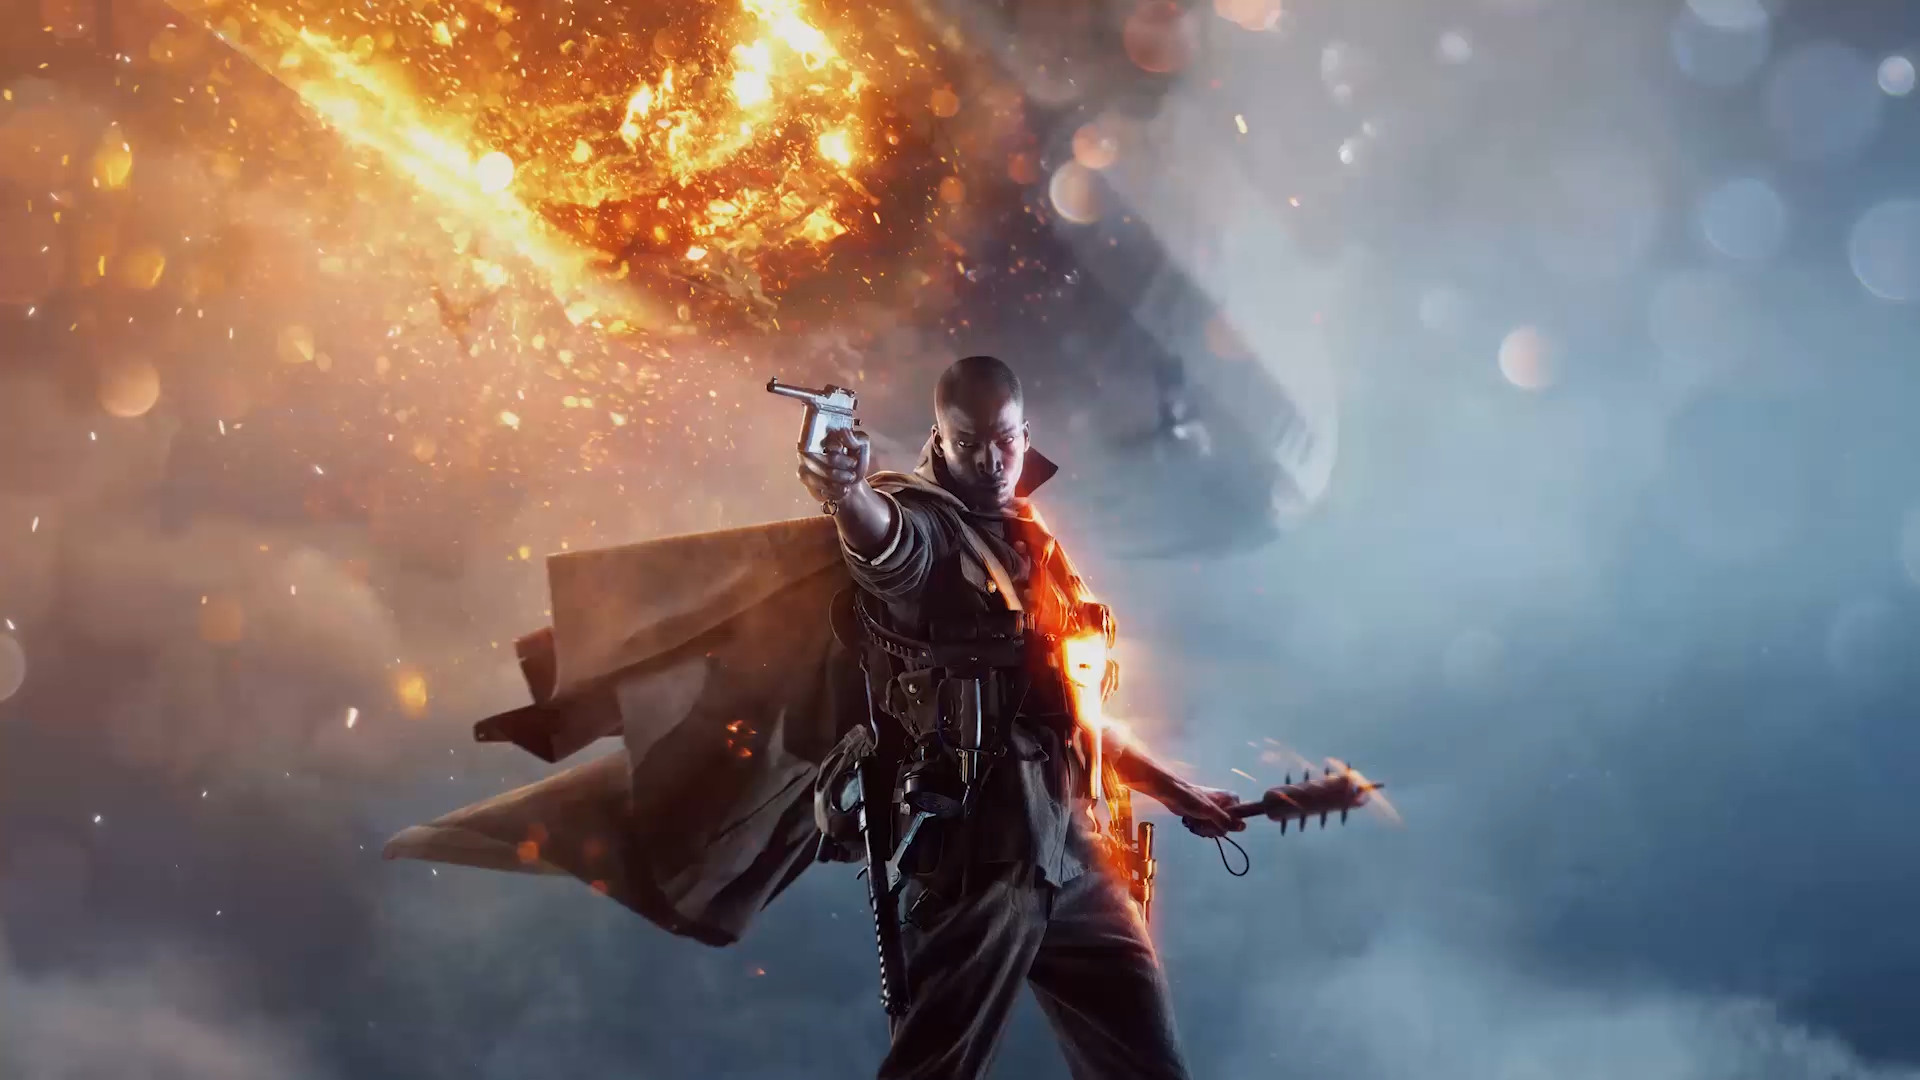 They Shall Not Pass expansion brings trench warfare to Battlefield 1